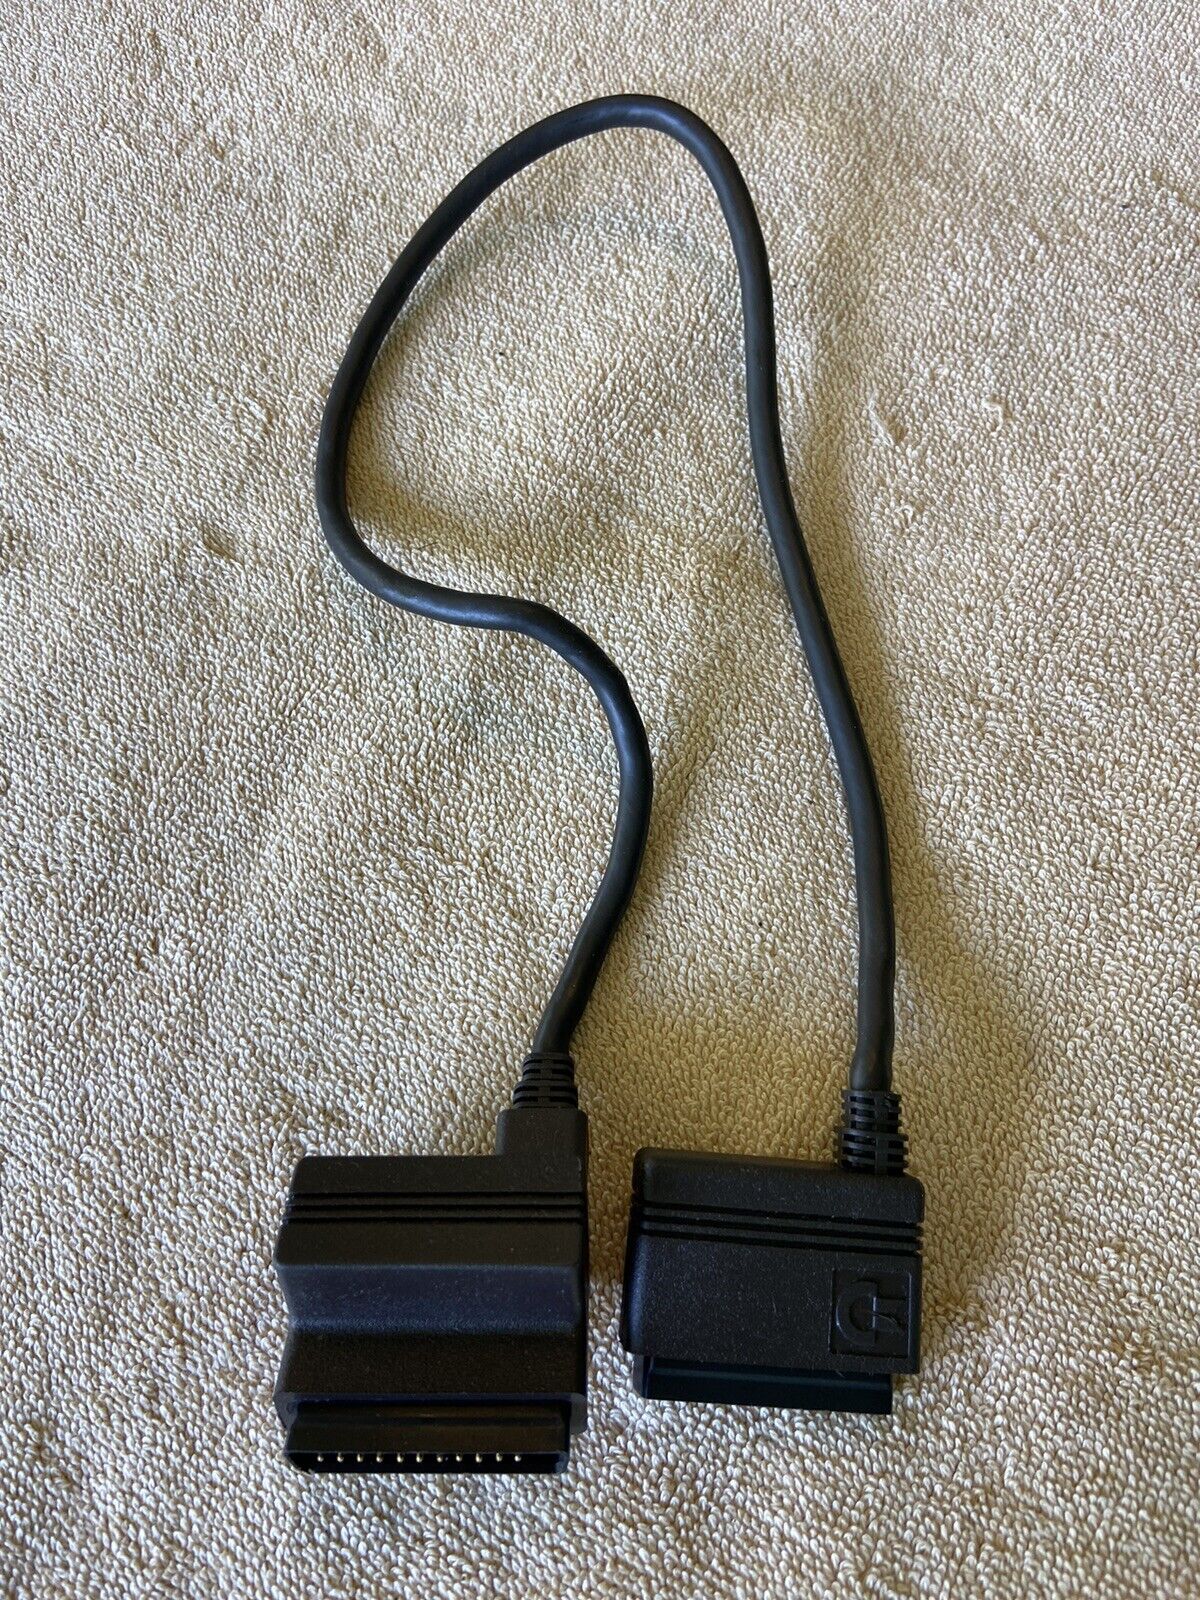 Commodore SX-64 OEM KEYBOARD CABLE ONLY GOOD CONDITION SX64 C-64